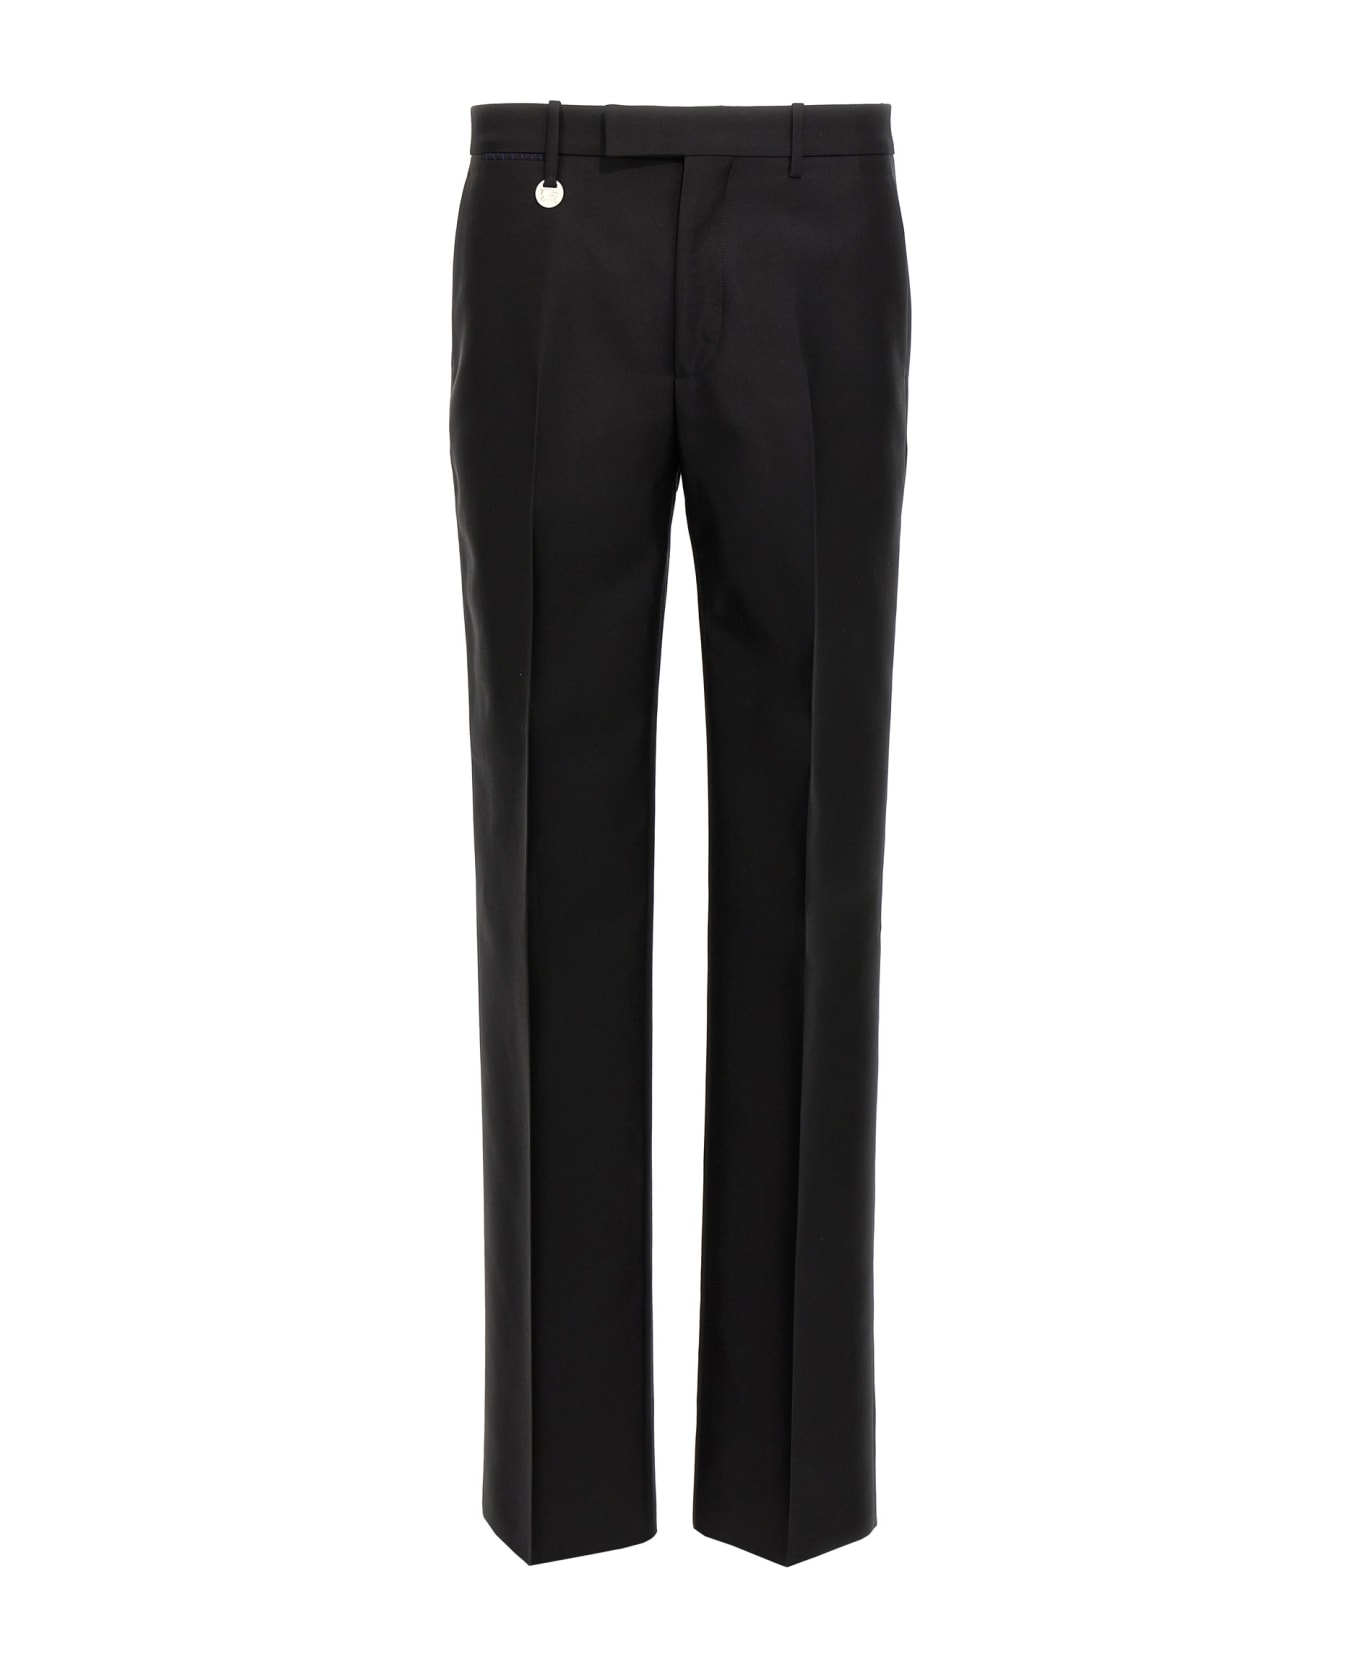 Burberry Tailored Trousers - Black ボトムス